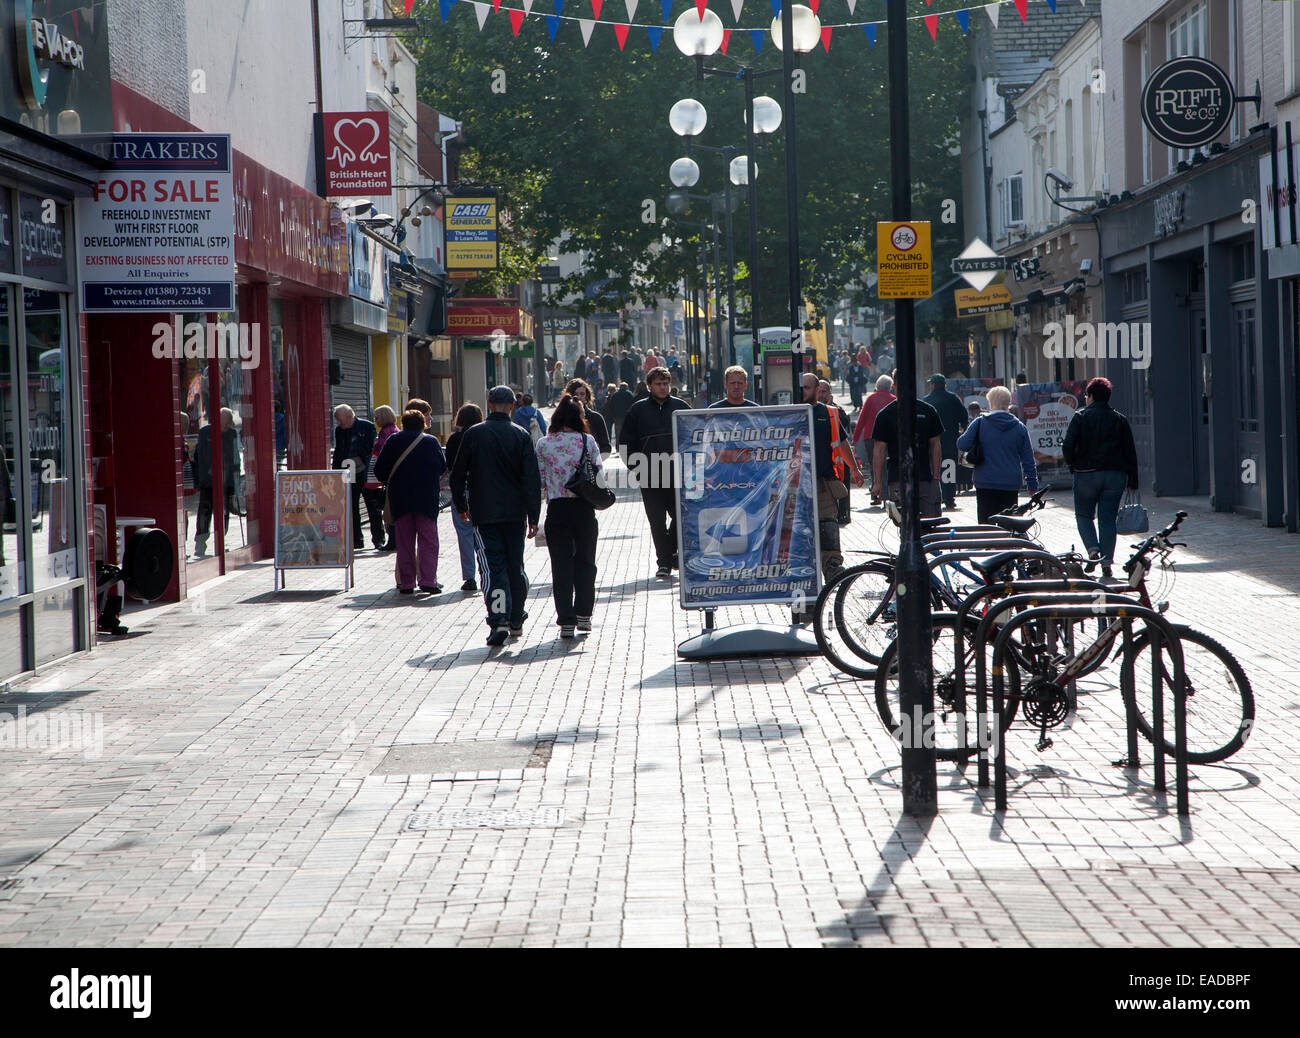 Busy pedestrianised shopping street in the town centre of Swindon, England, UK Stock Photo